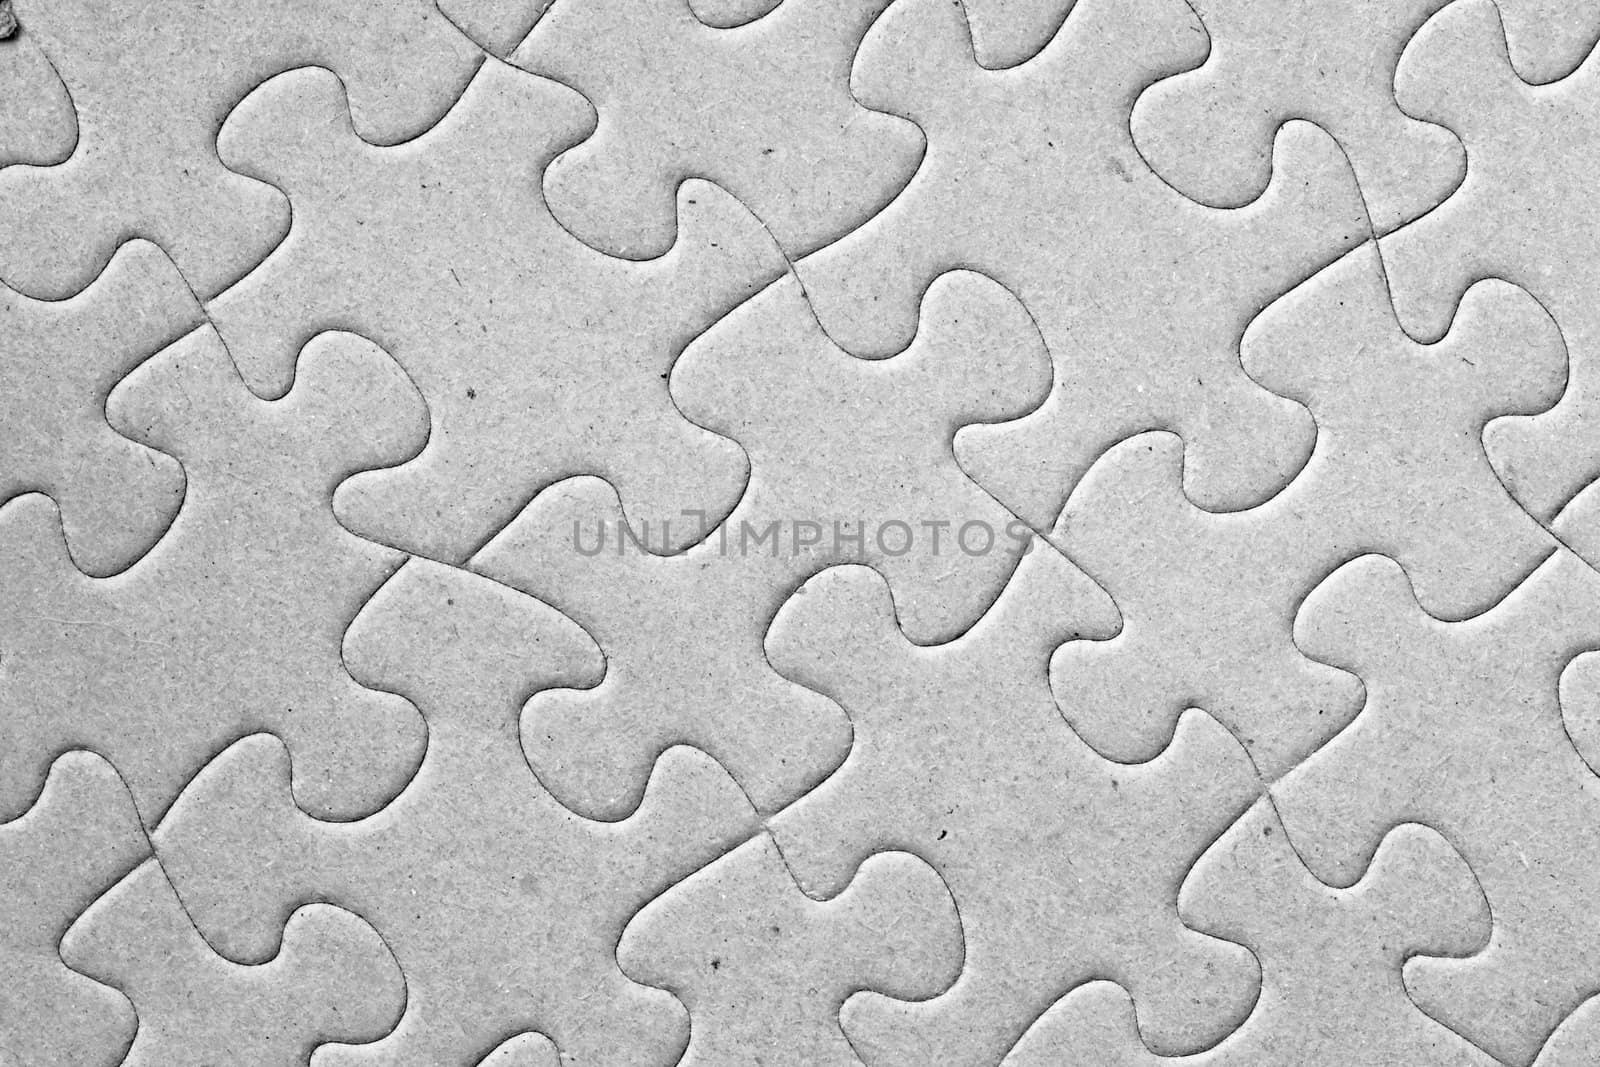 Blank grey complete cardboard jigsaw puzzle shot at an angle, great details on the pieces